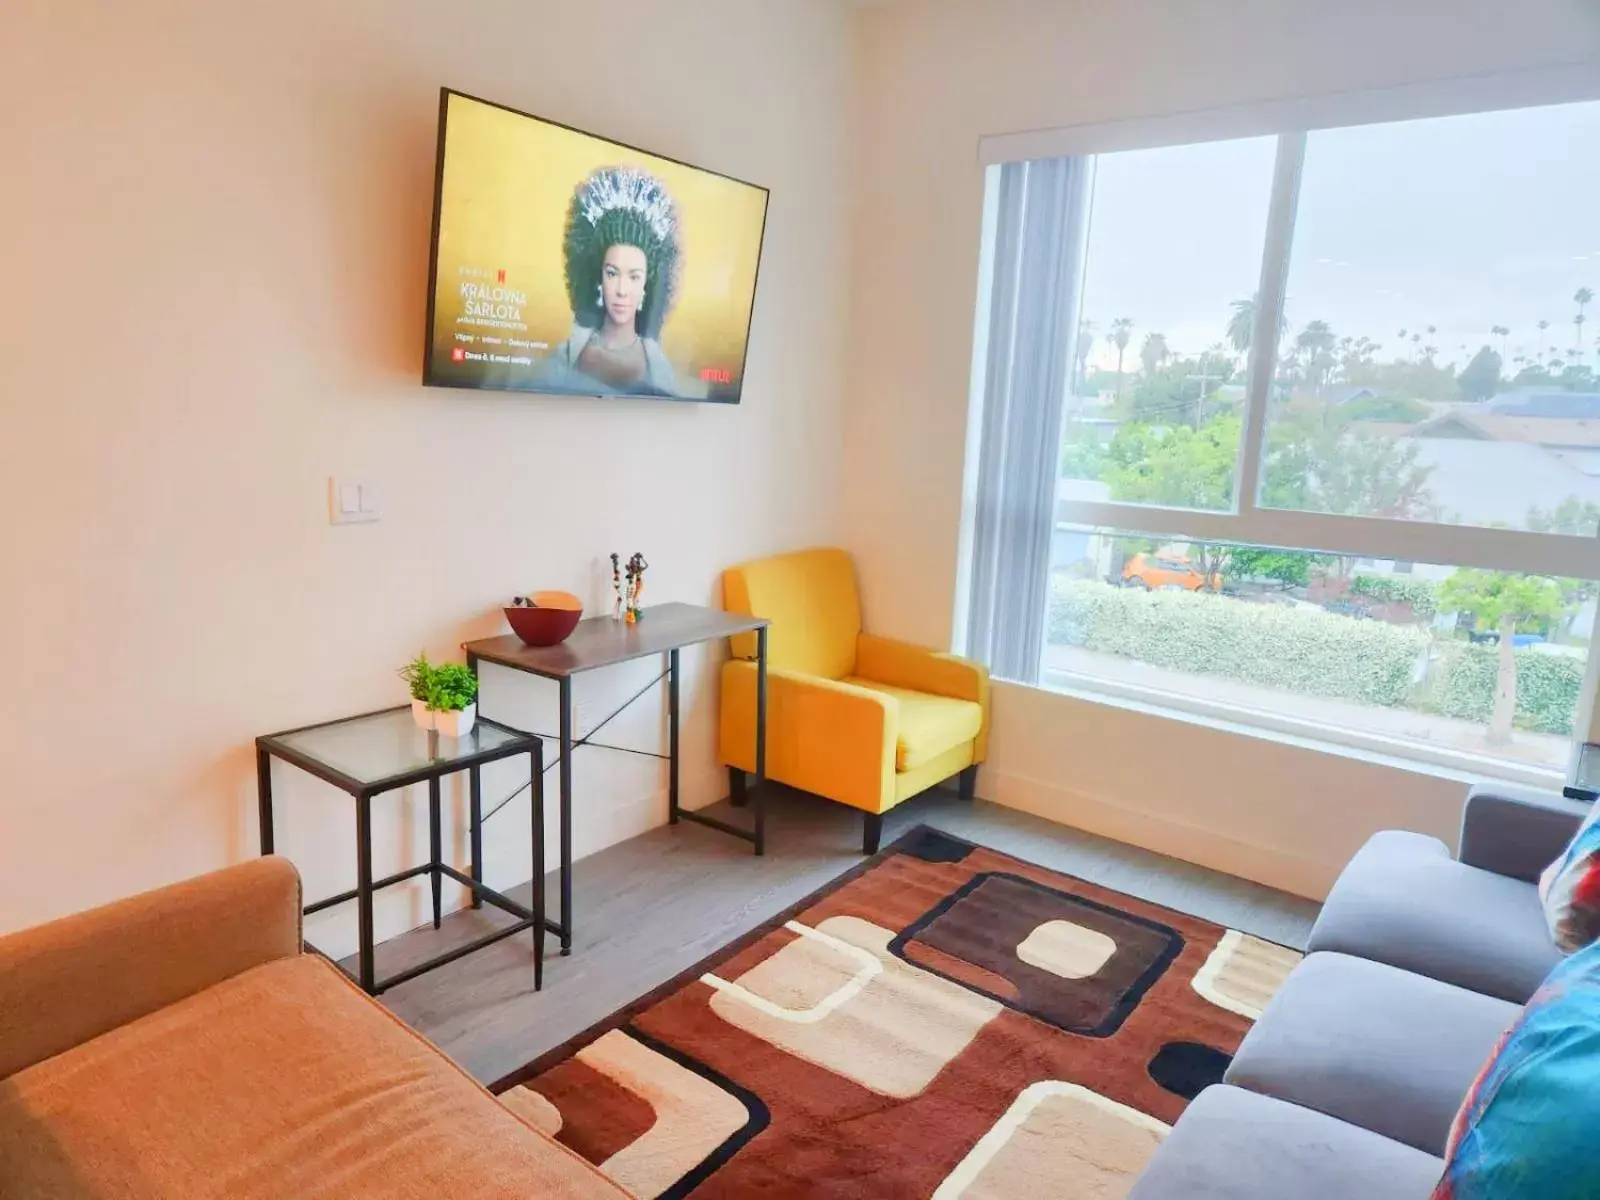 TV and multimedia, Seating Area in Central Los Angeles Hollywood Homes